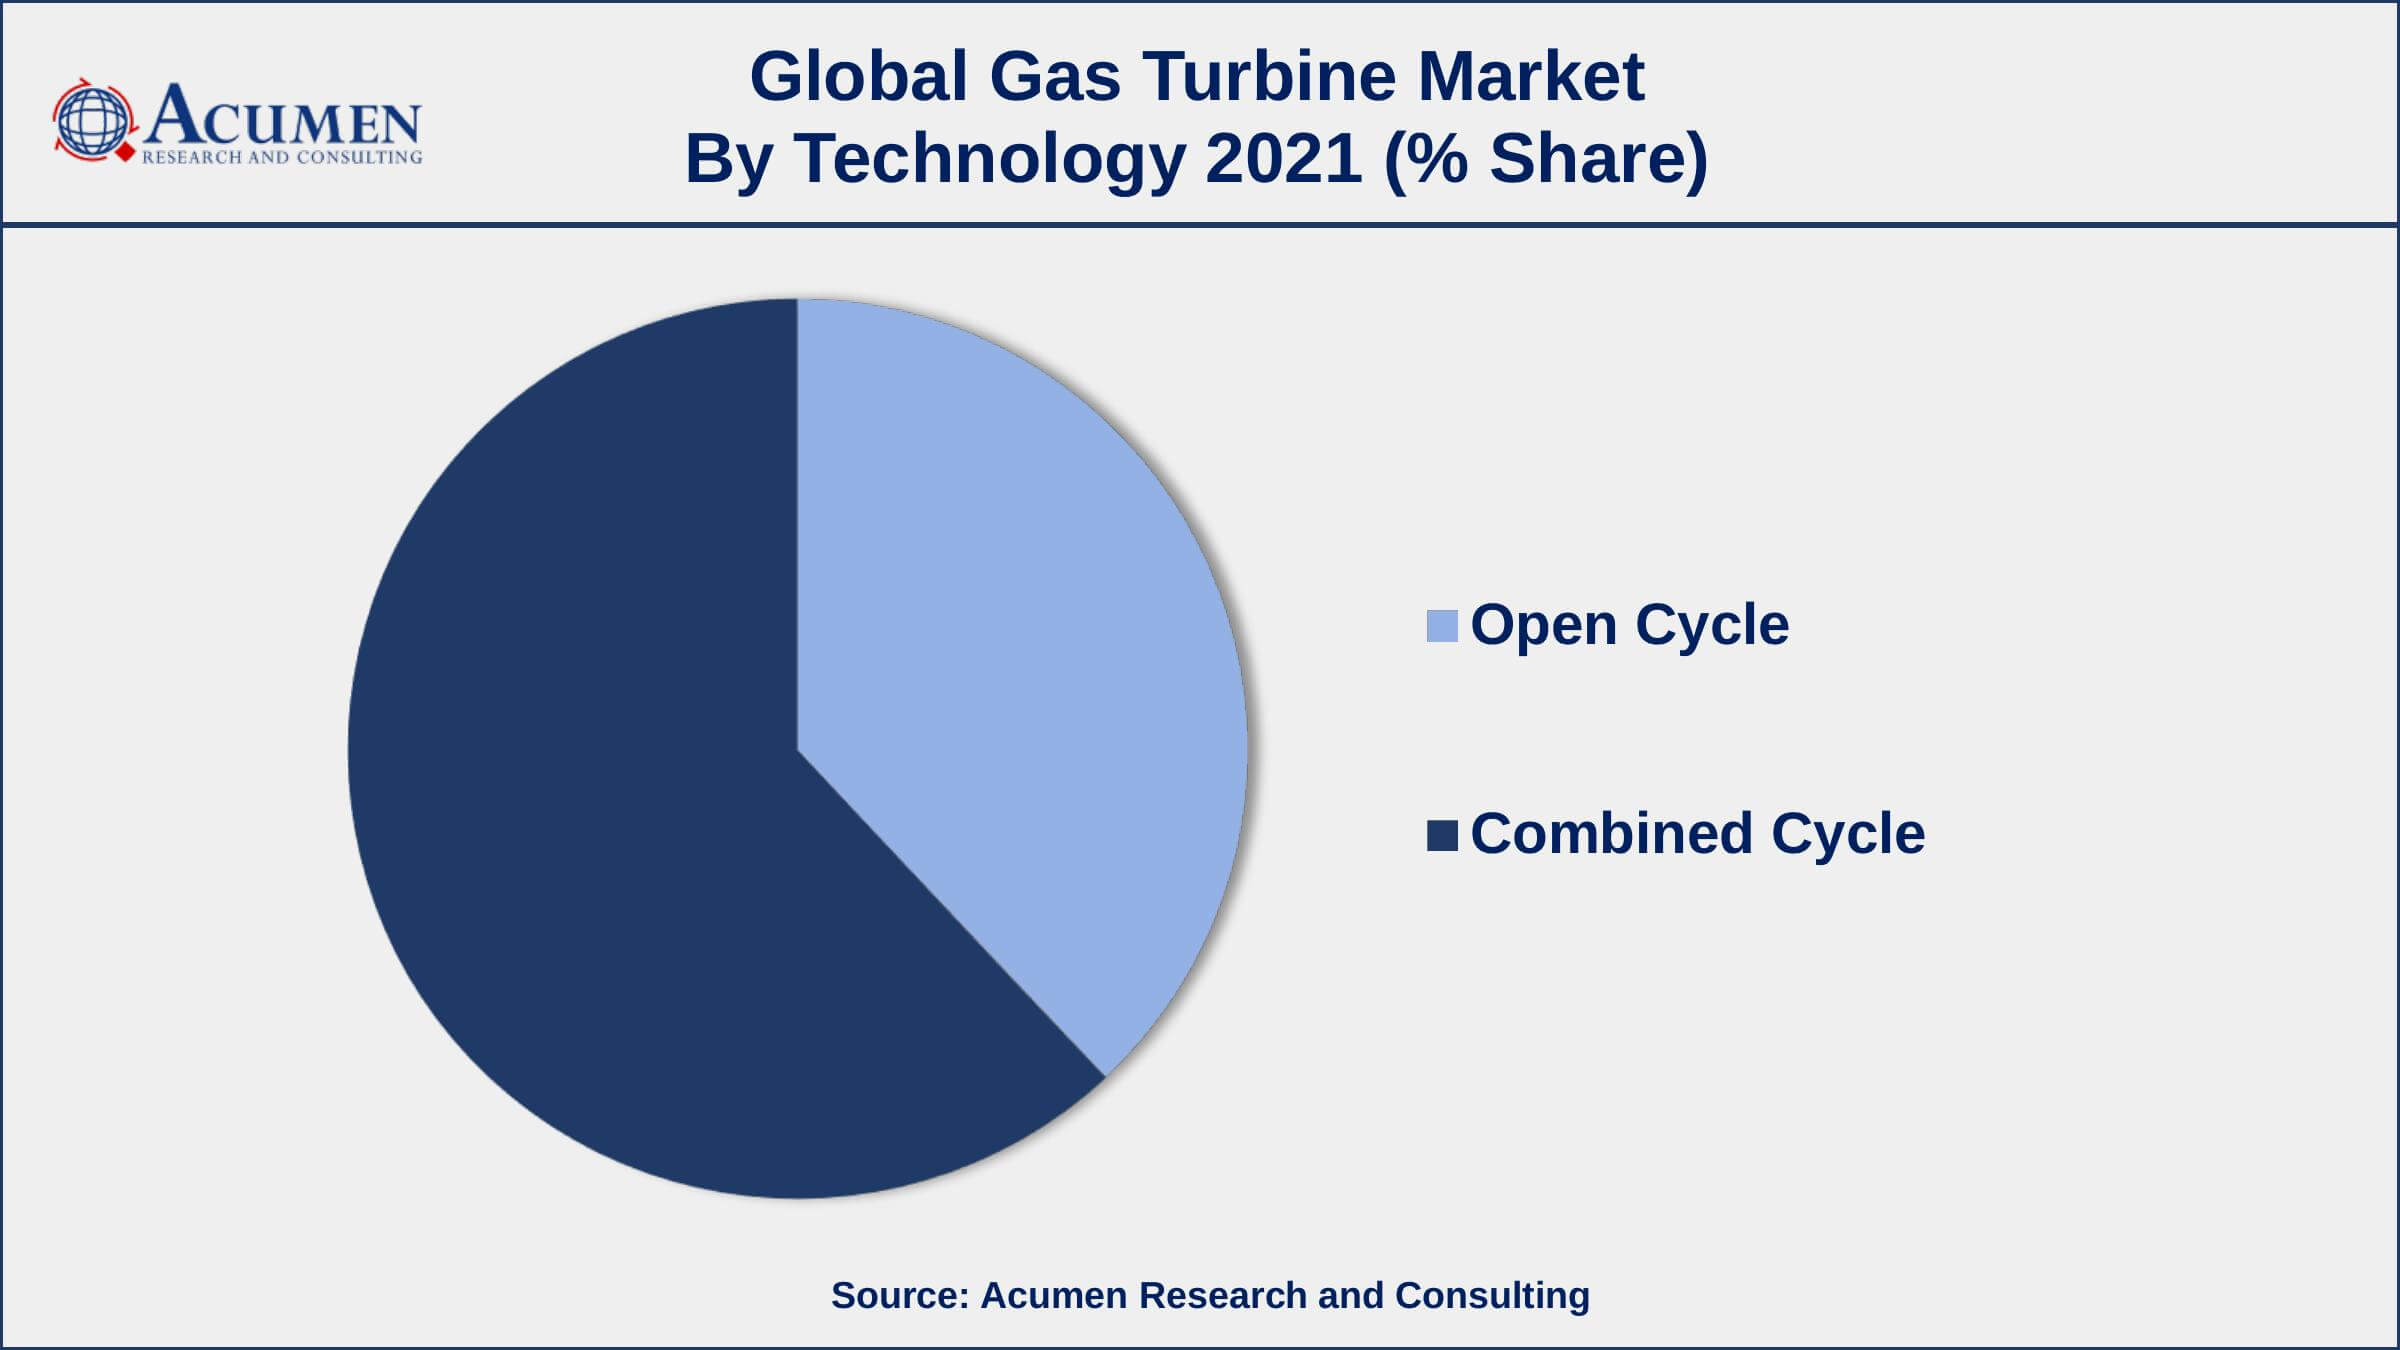 Rising demand for electricity, drives the gas turbine market size